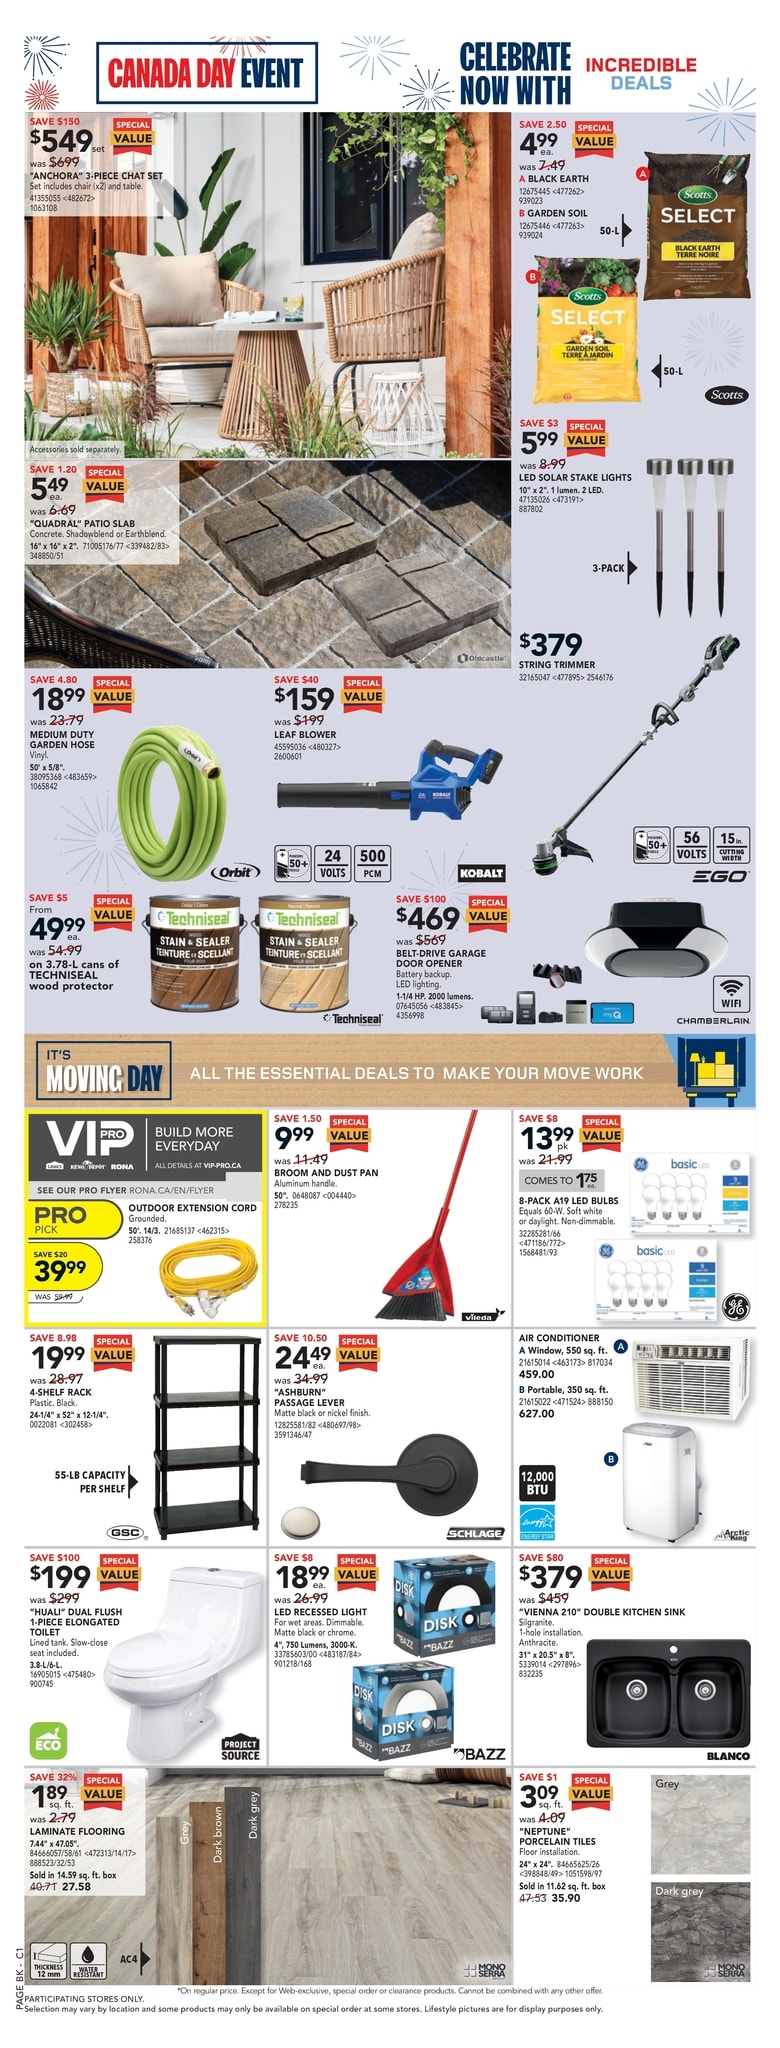 Rona - Weekly Flyer Specials - Page 2